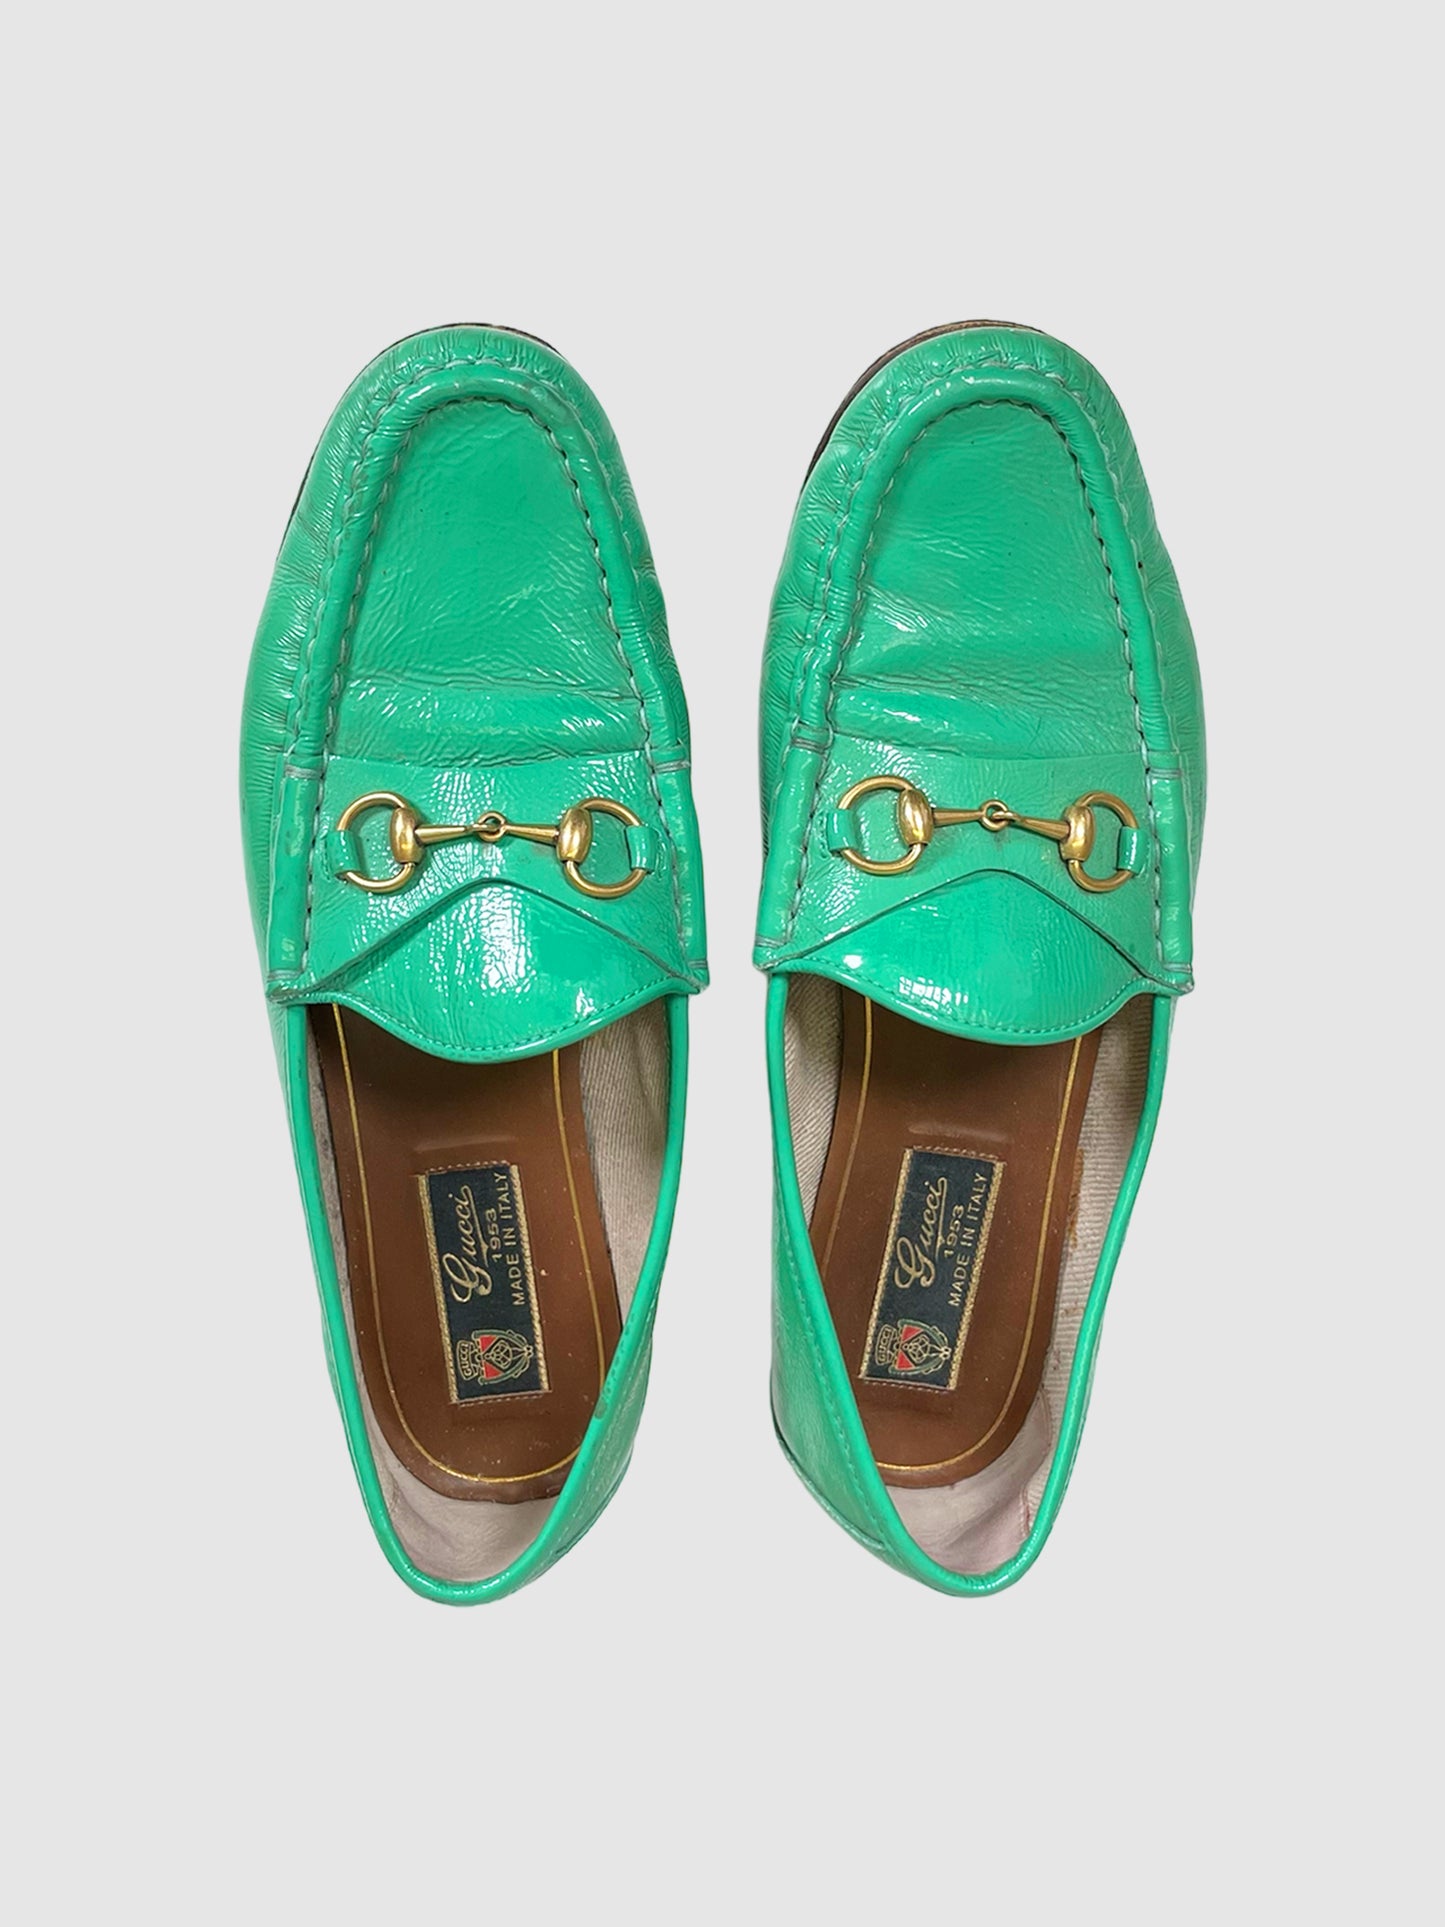 Gucci Patent Leather Horsebit Loafers - Size 38